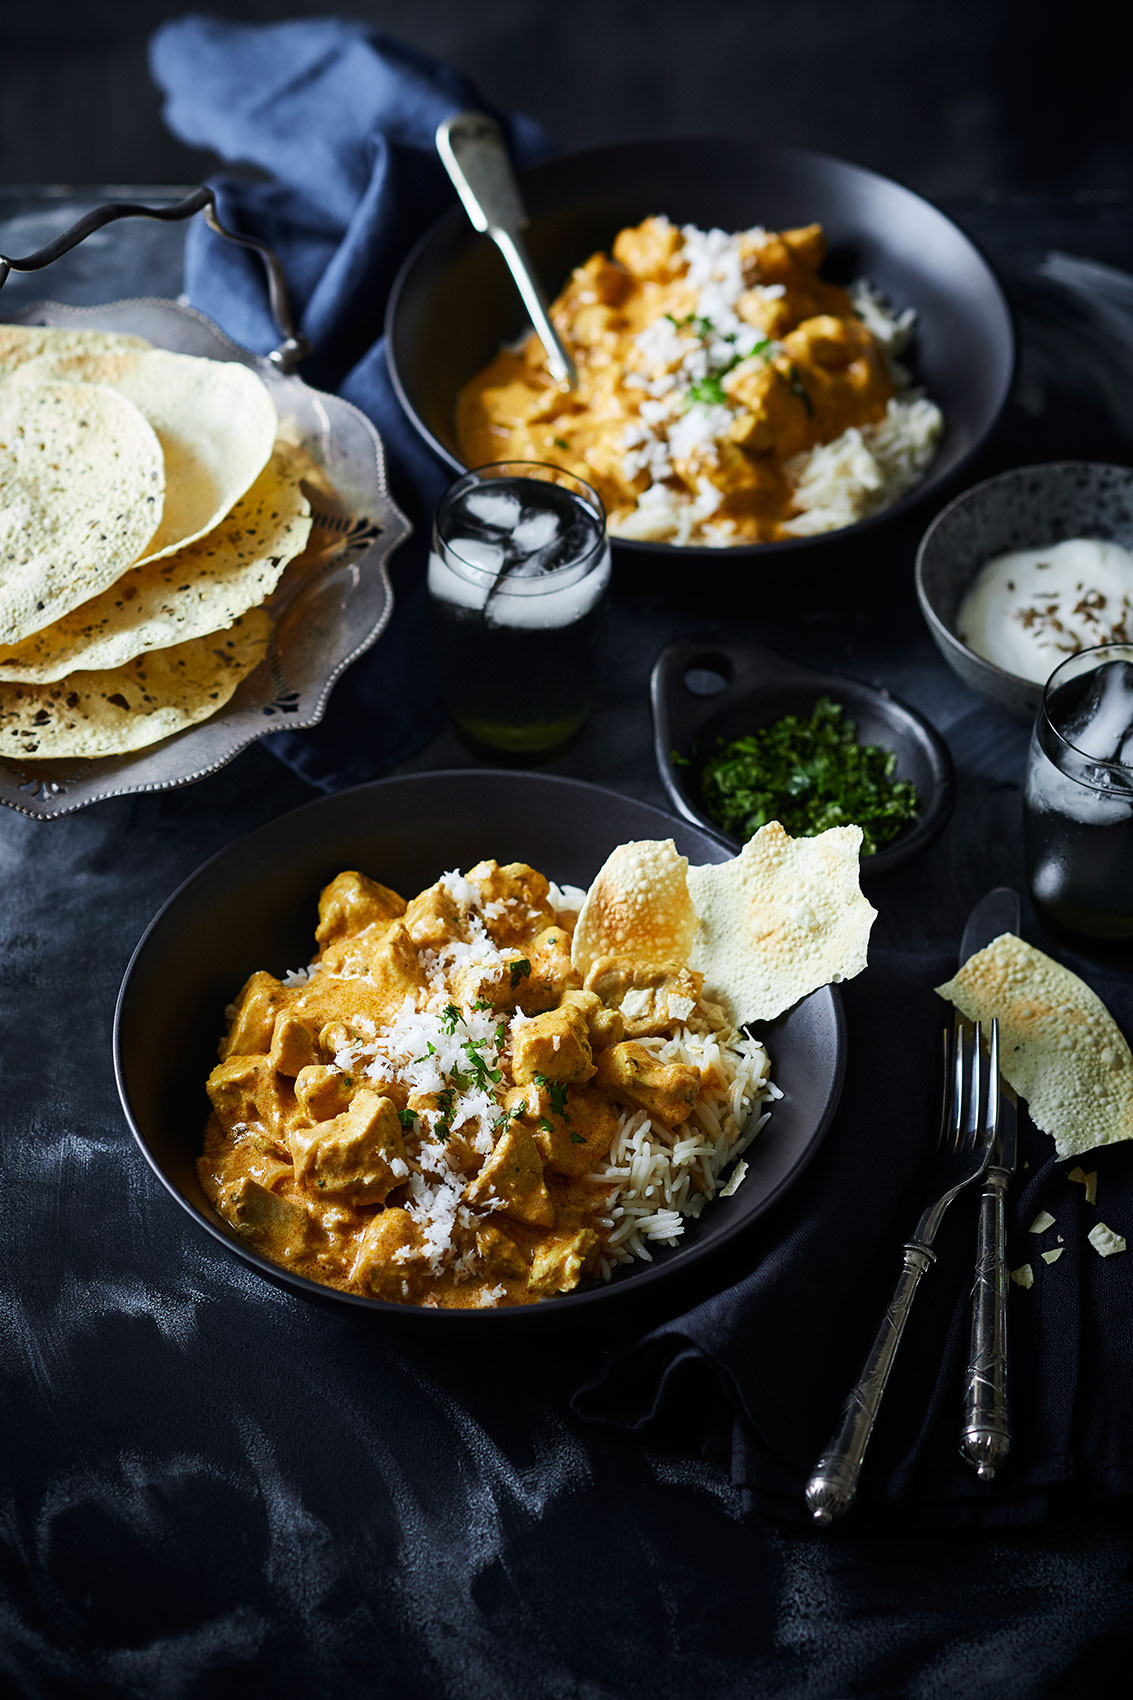 My Indian Kitchen • Coconut Chicken Curry with Popadoms & Basmati Rice • Cookbook & Editorial Food Photography